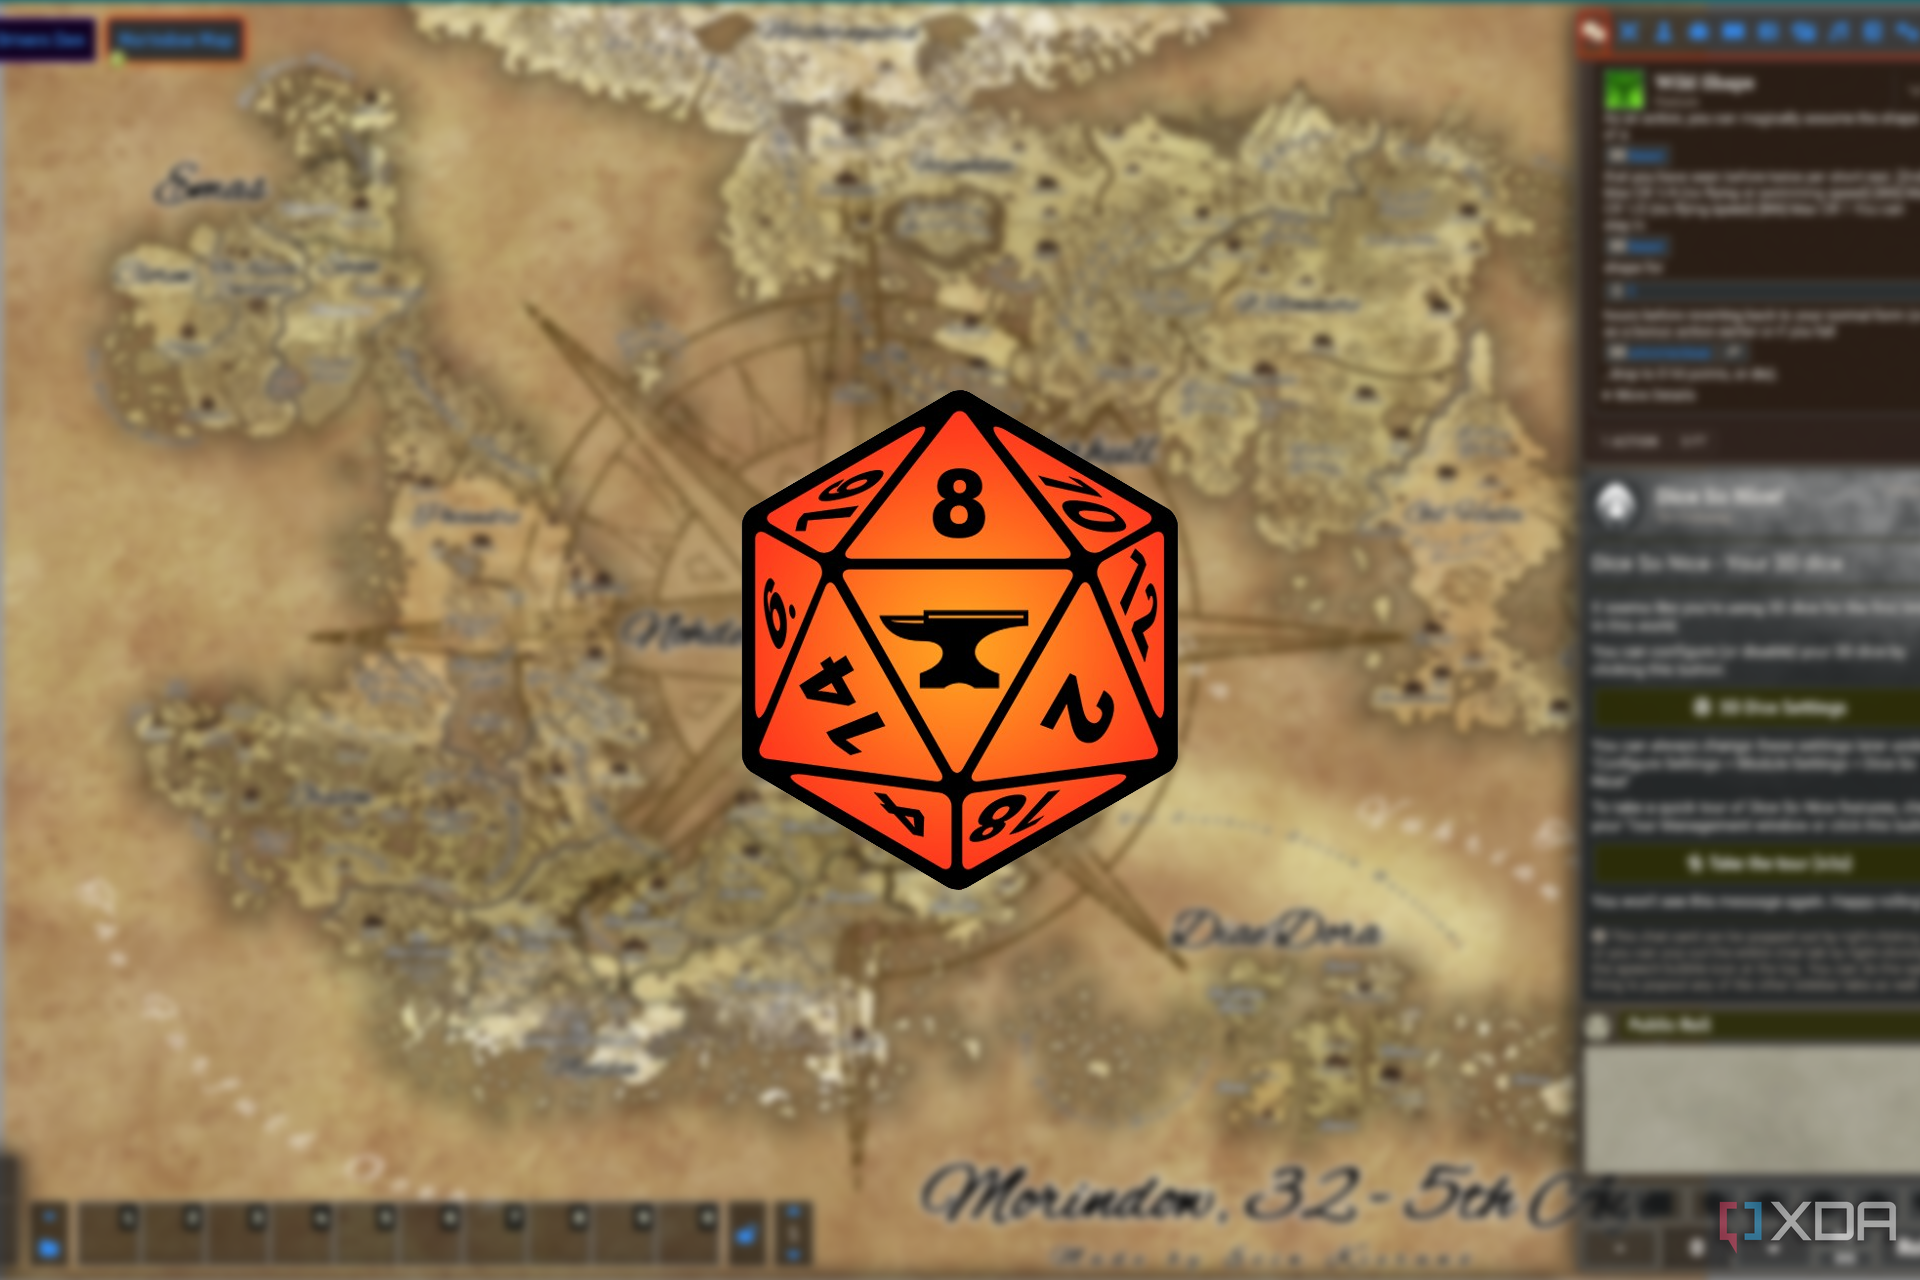 Foundry logo over a map of Morindow